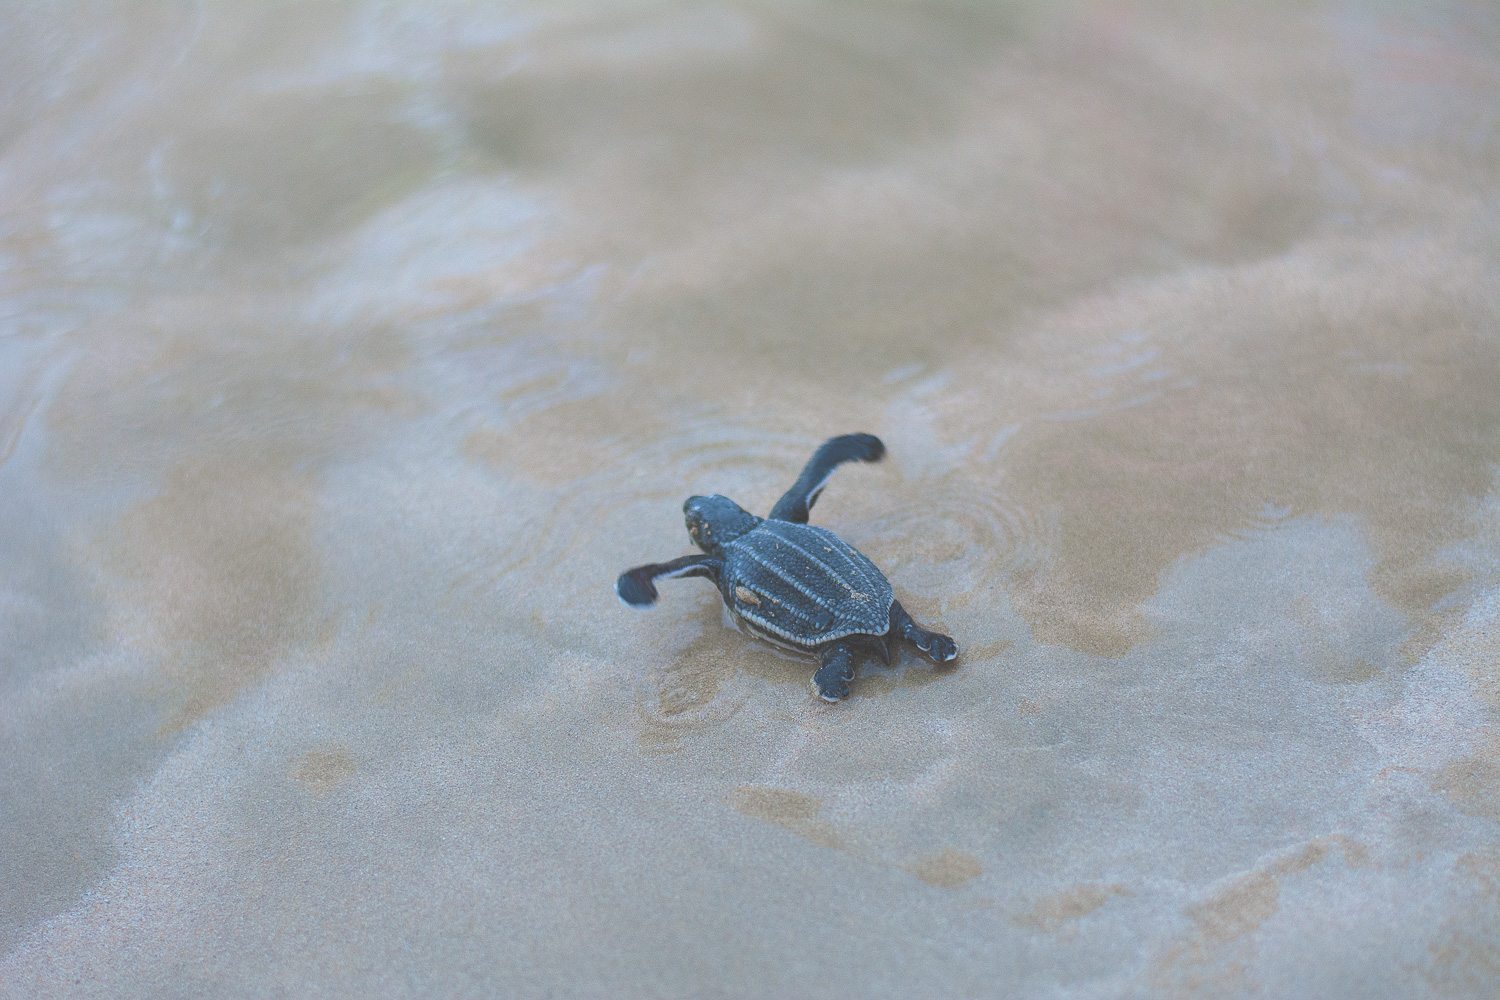 The Hatchling starting his path towards the ocean.